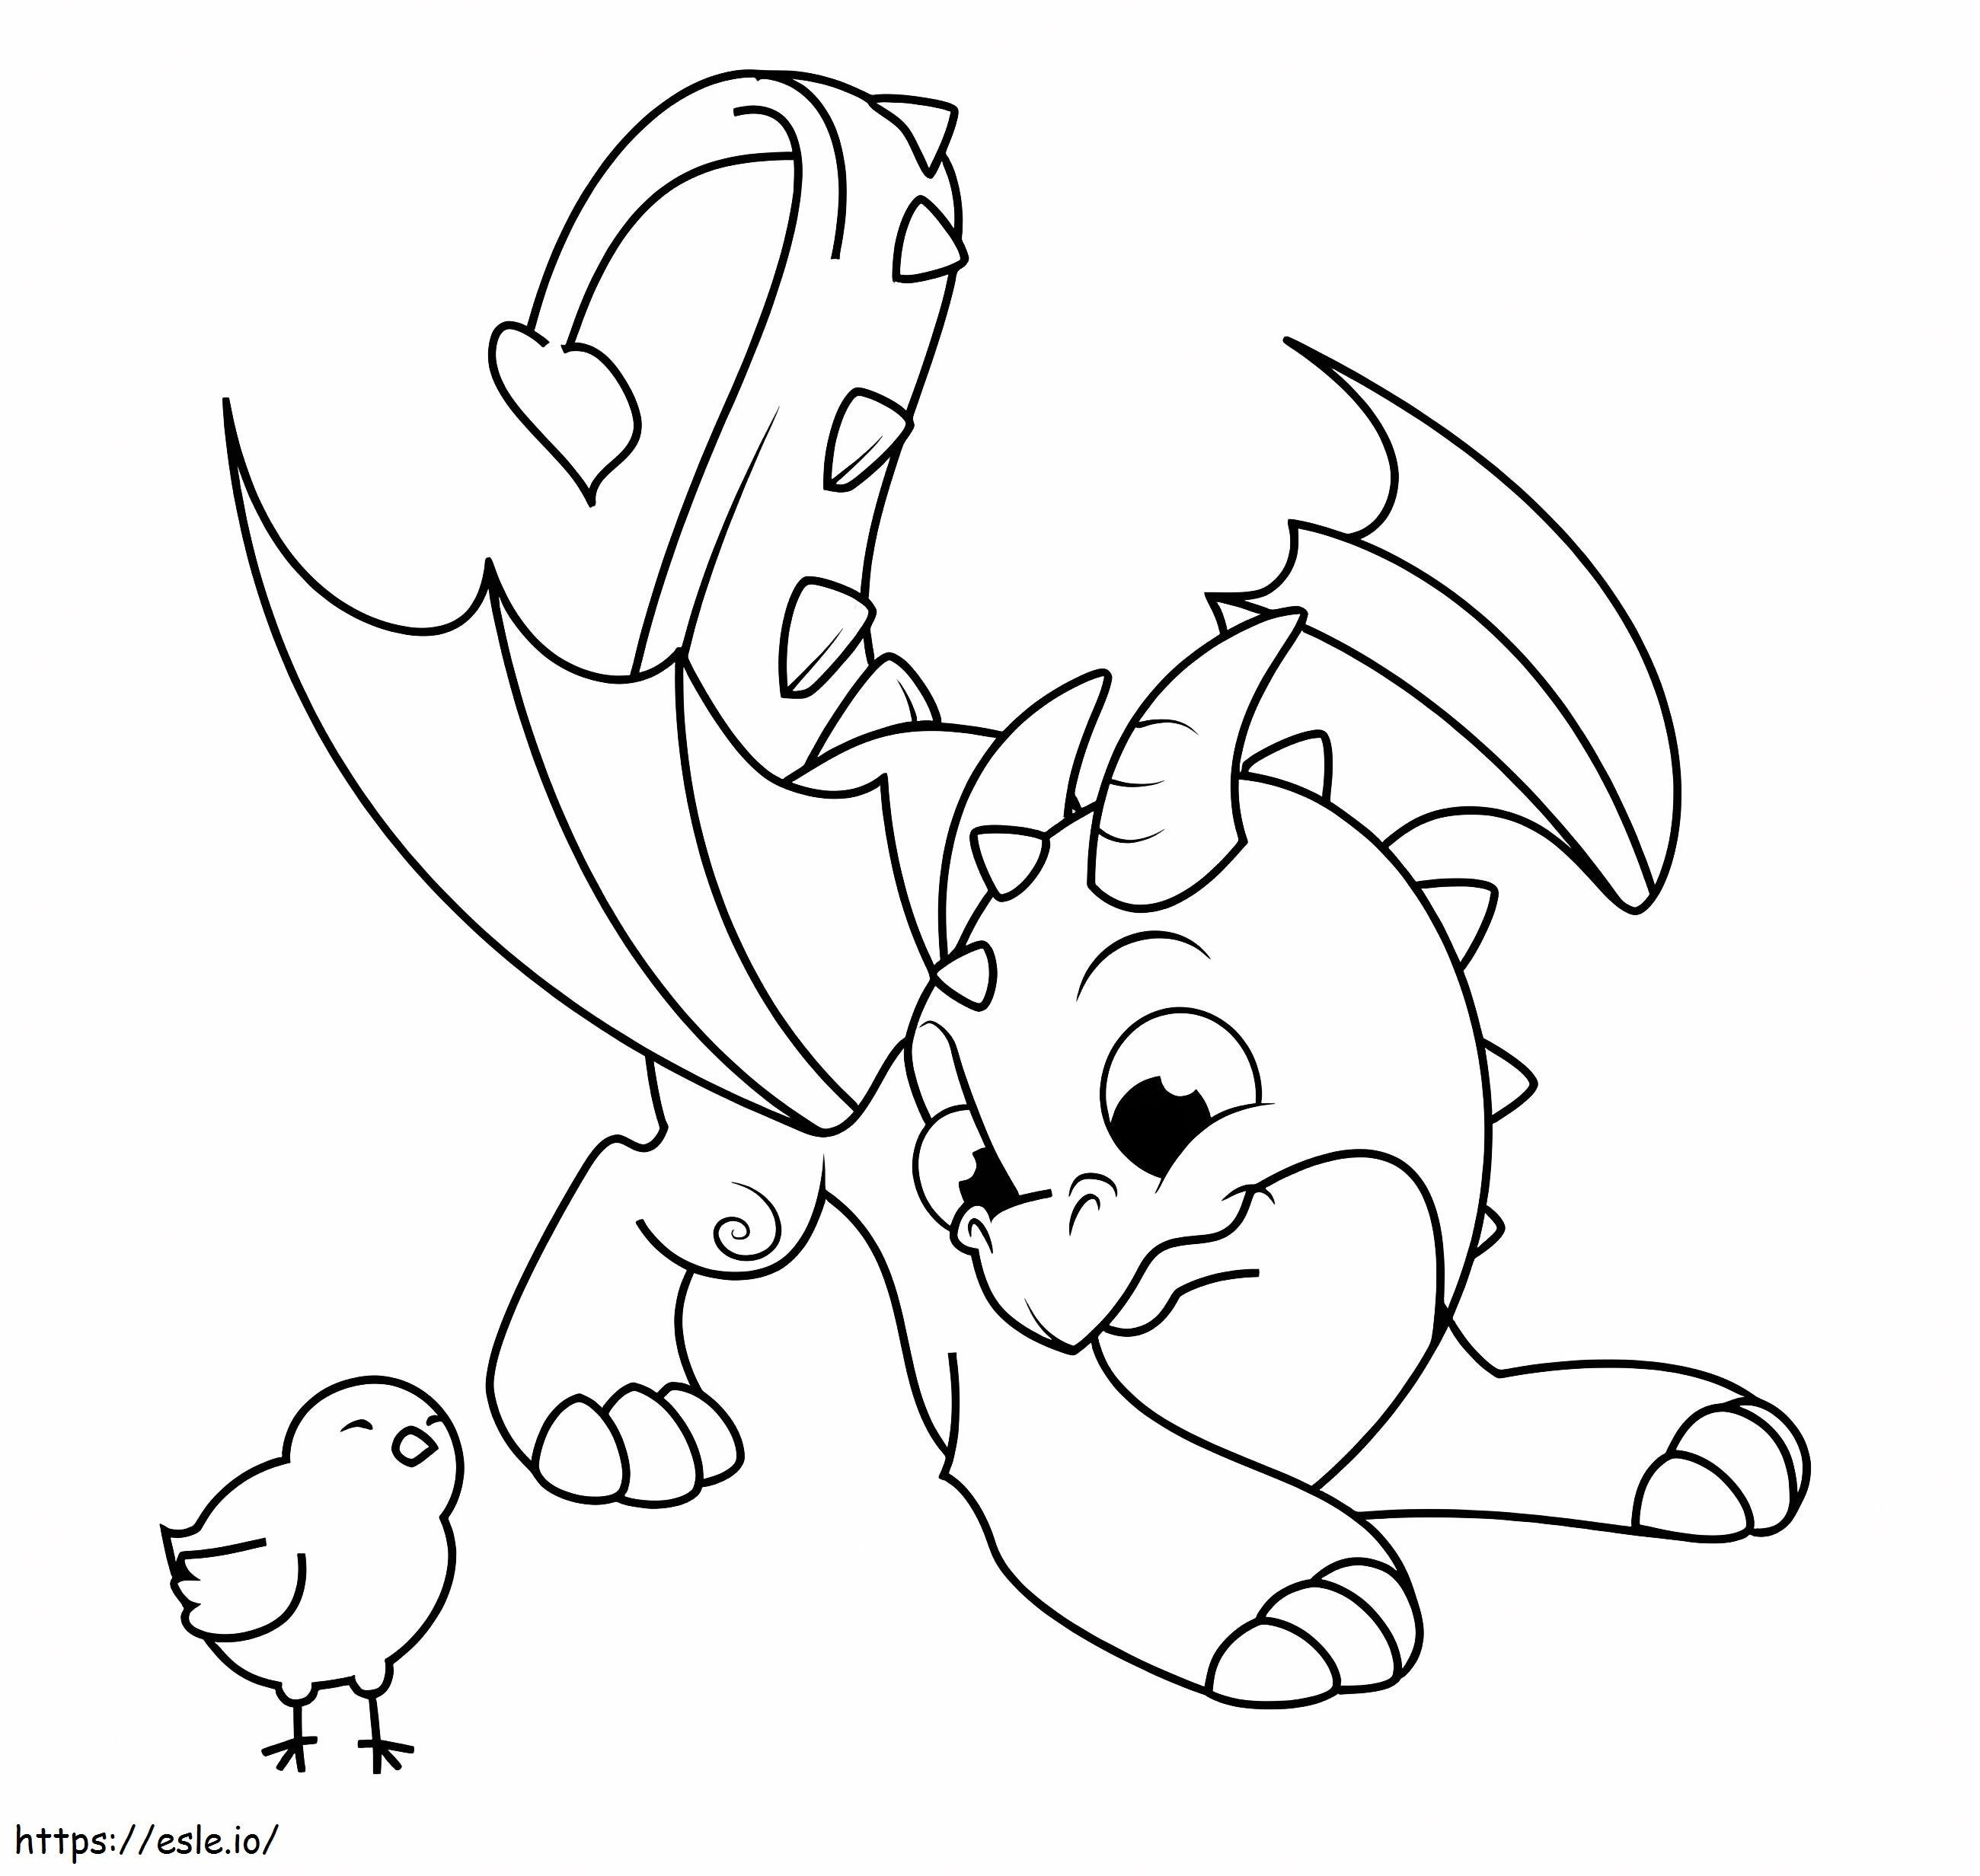 Dragon And Chicken coloring page